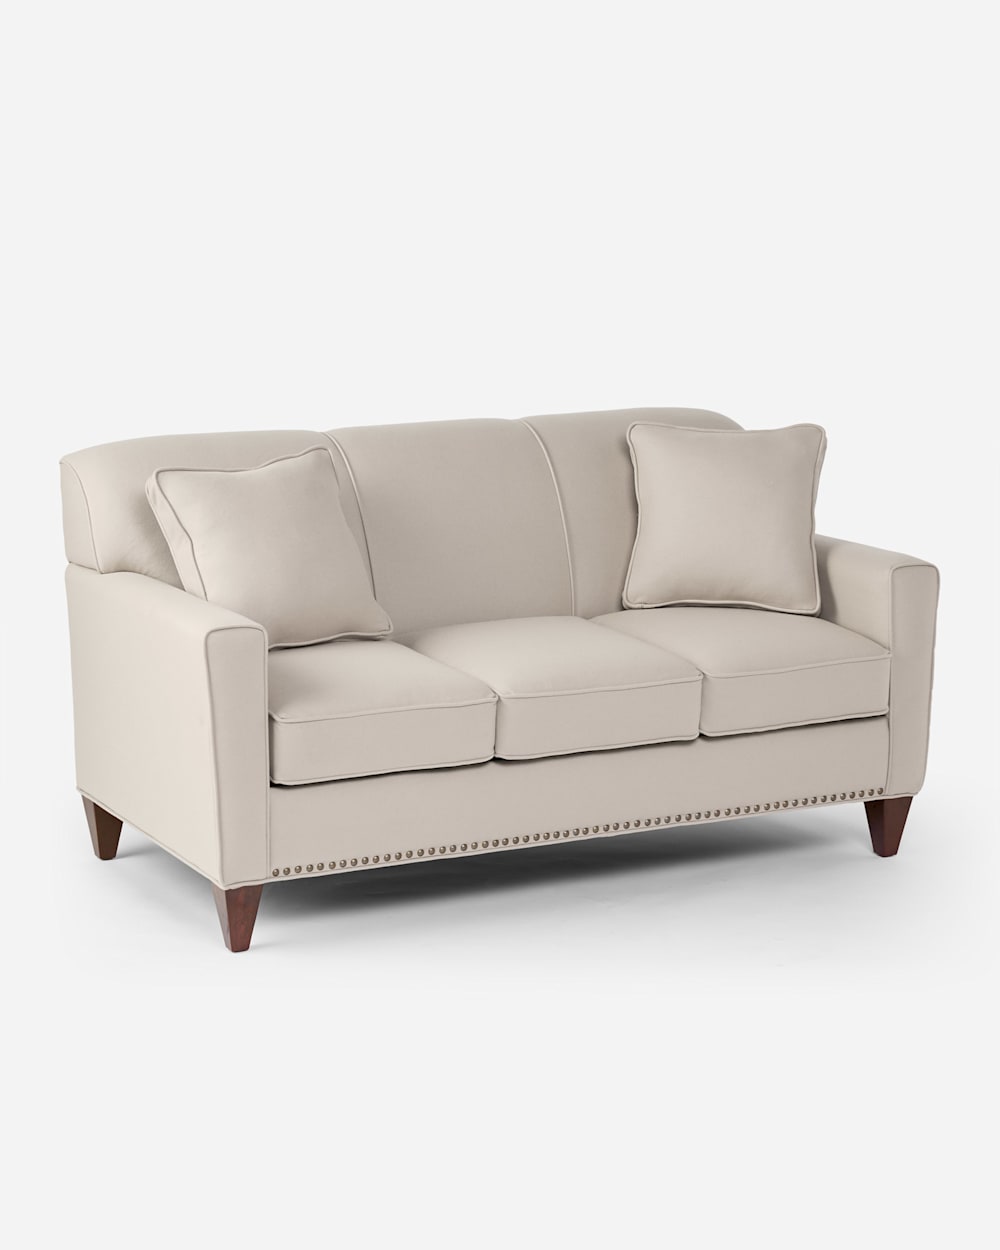 ADDITIONAL VIEW OF THOMAS KAY SOFA IN HARDING NATURAL/DOE image number 2